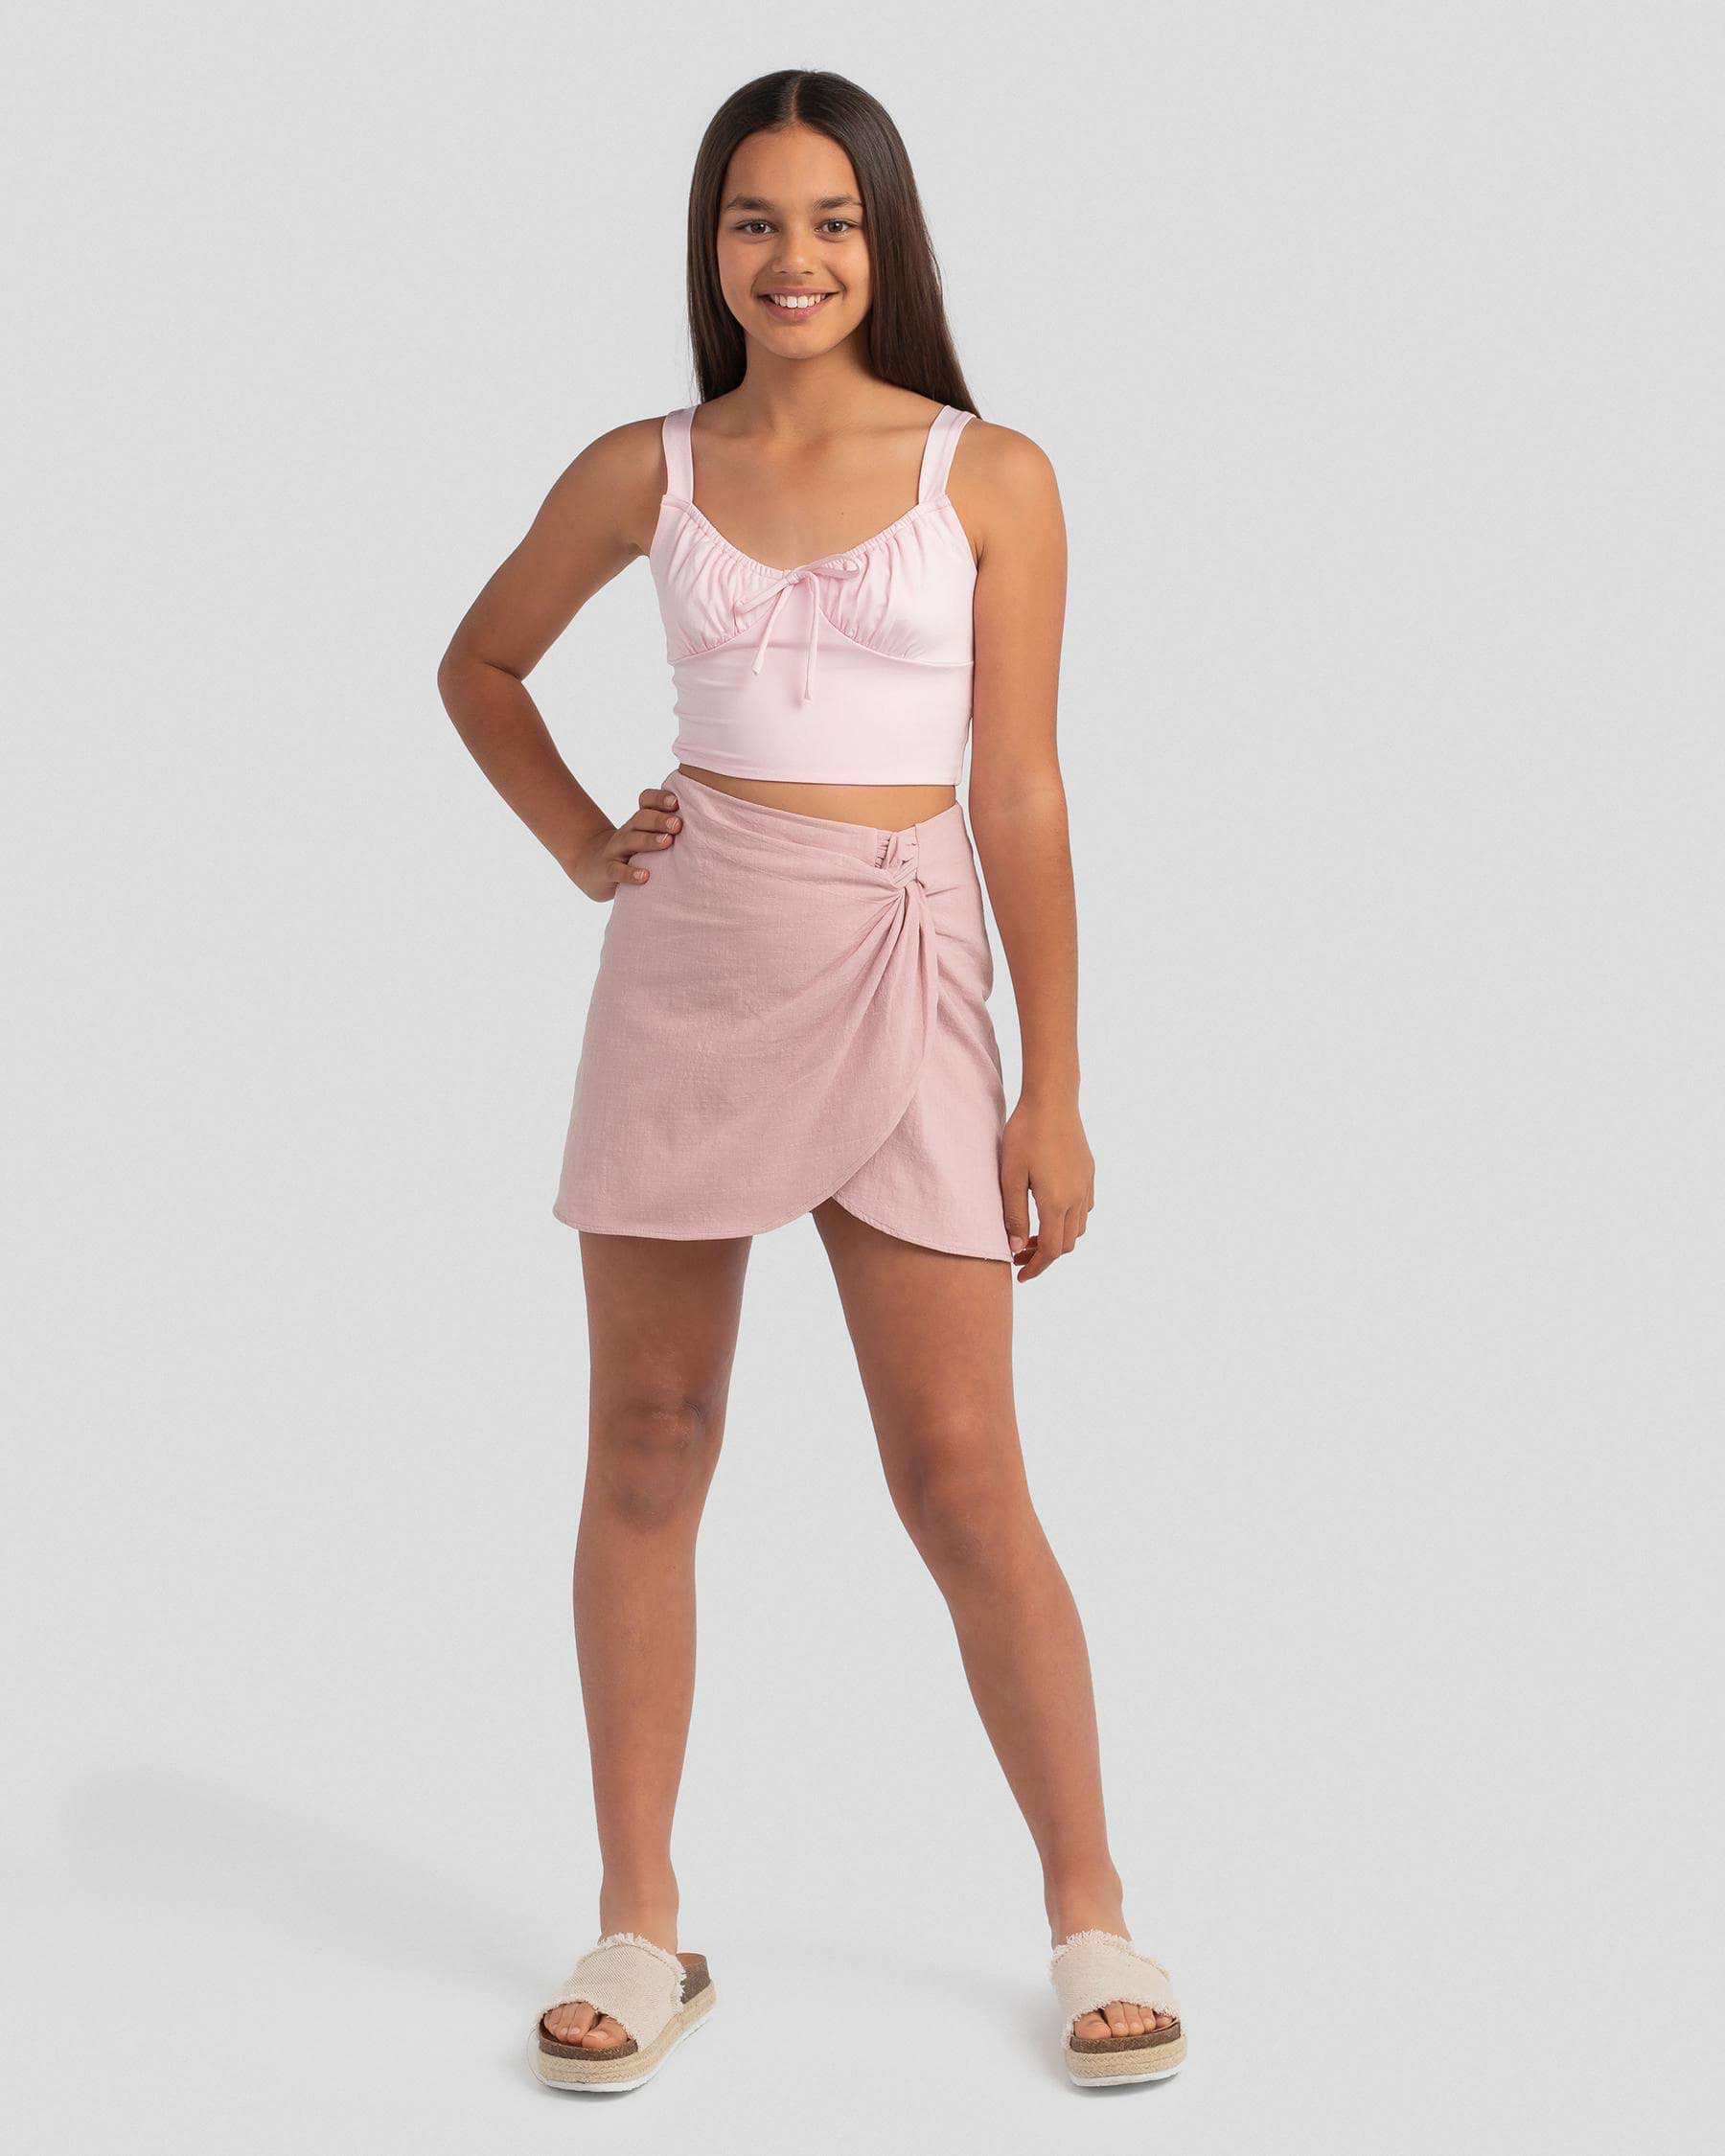 Ava And Ever Girls' Alicia Crop Top In Light Pink - Fast Shipping ...